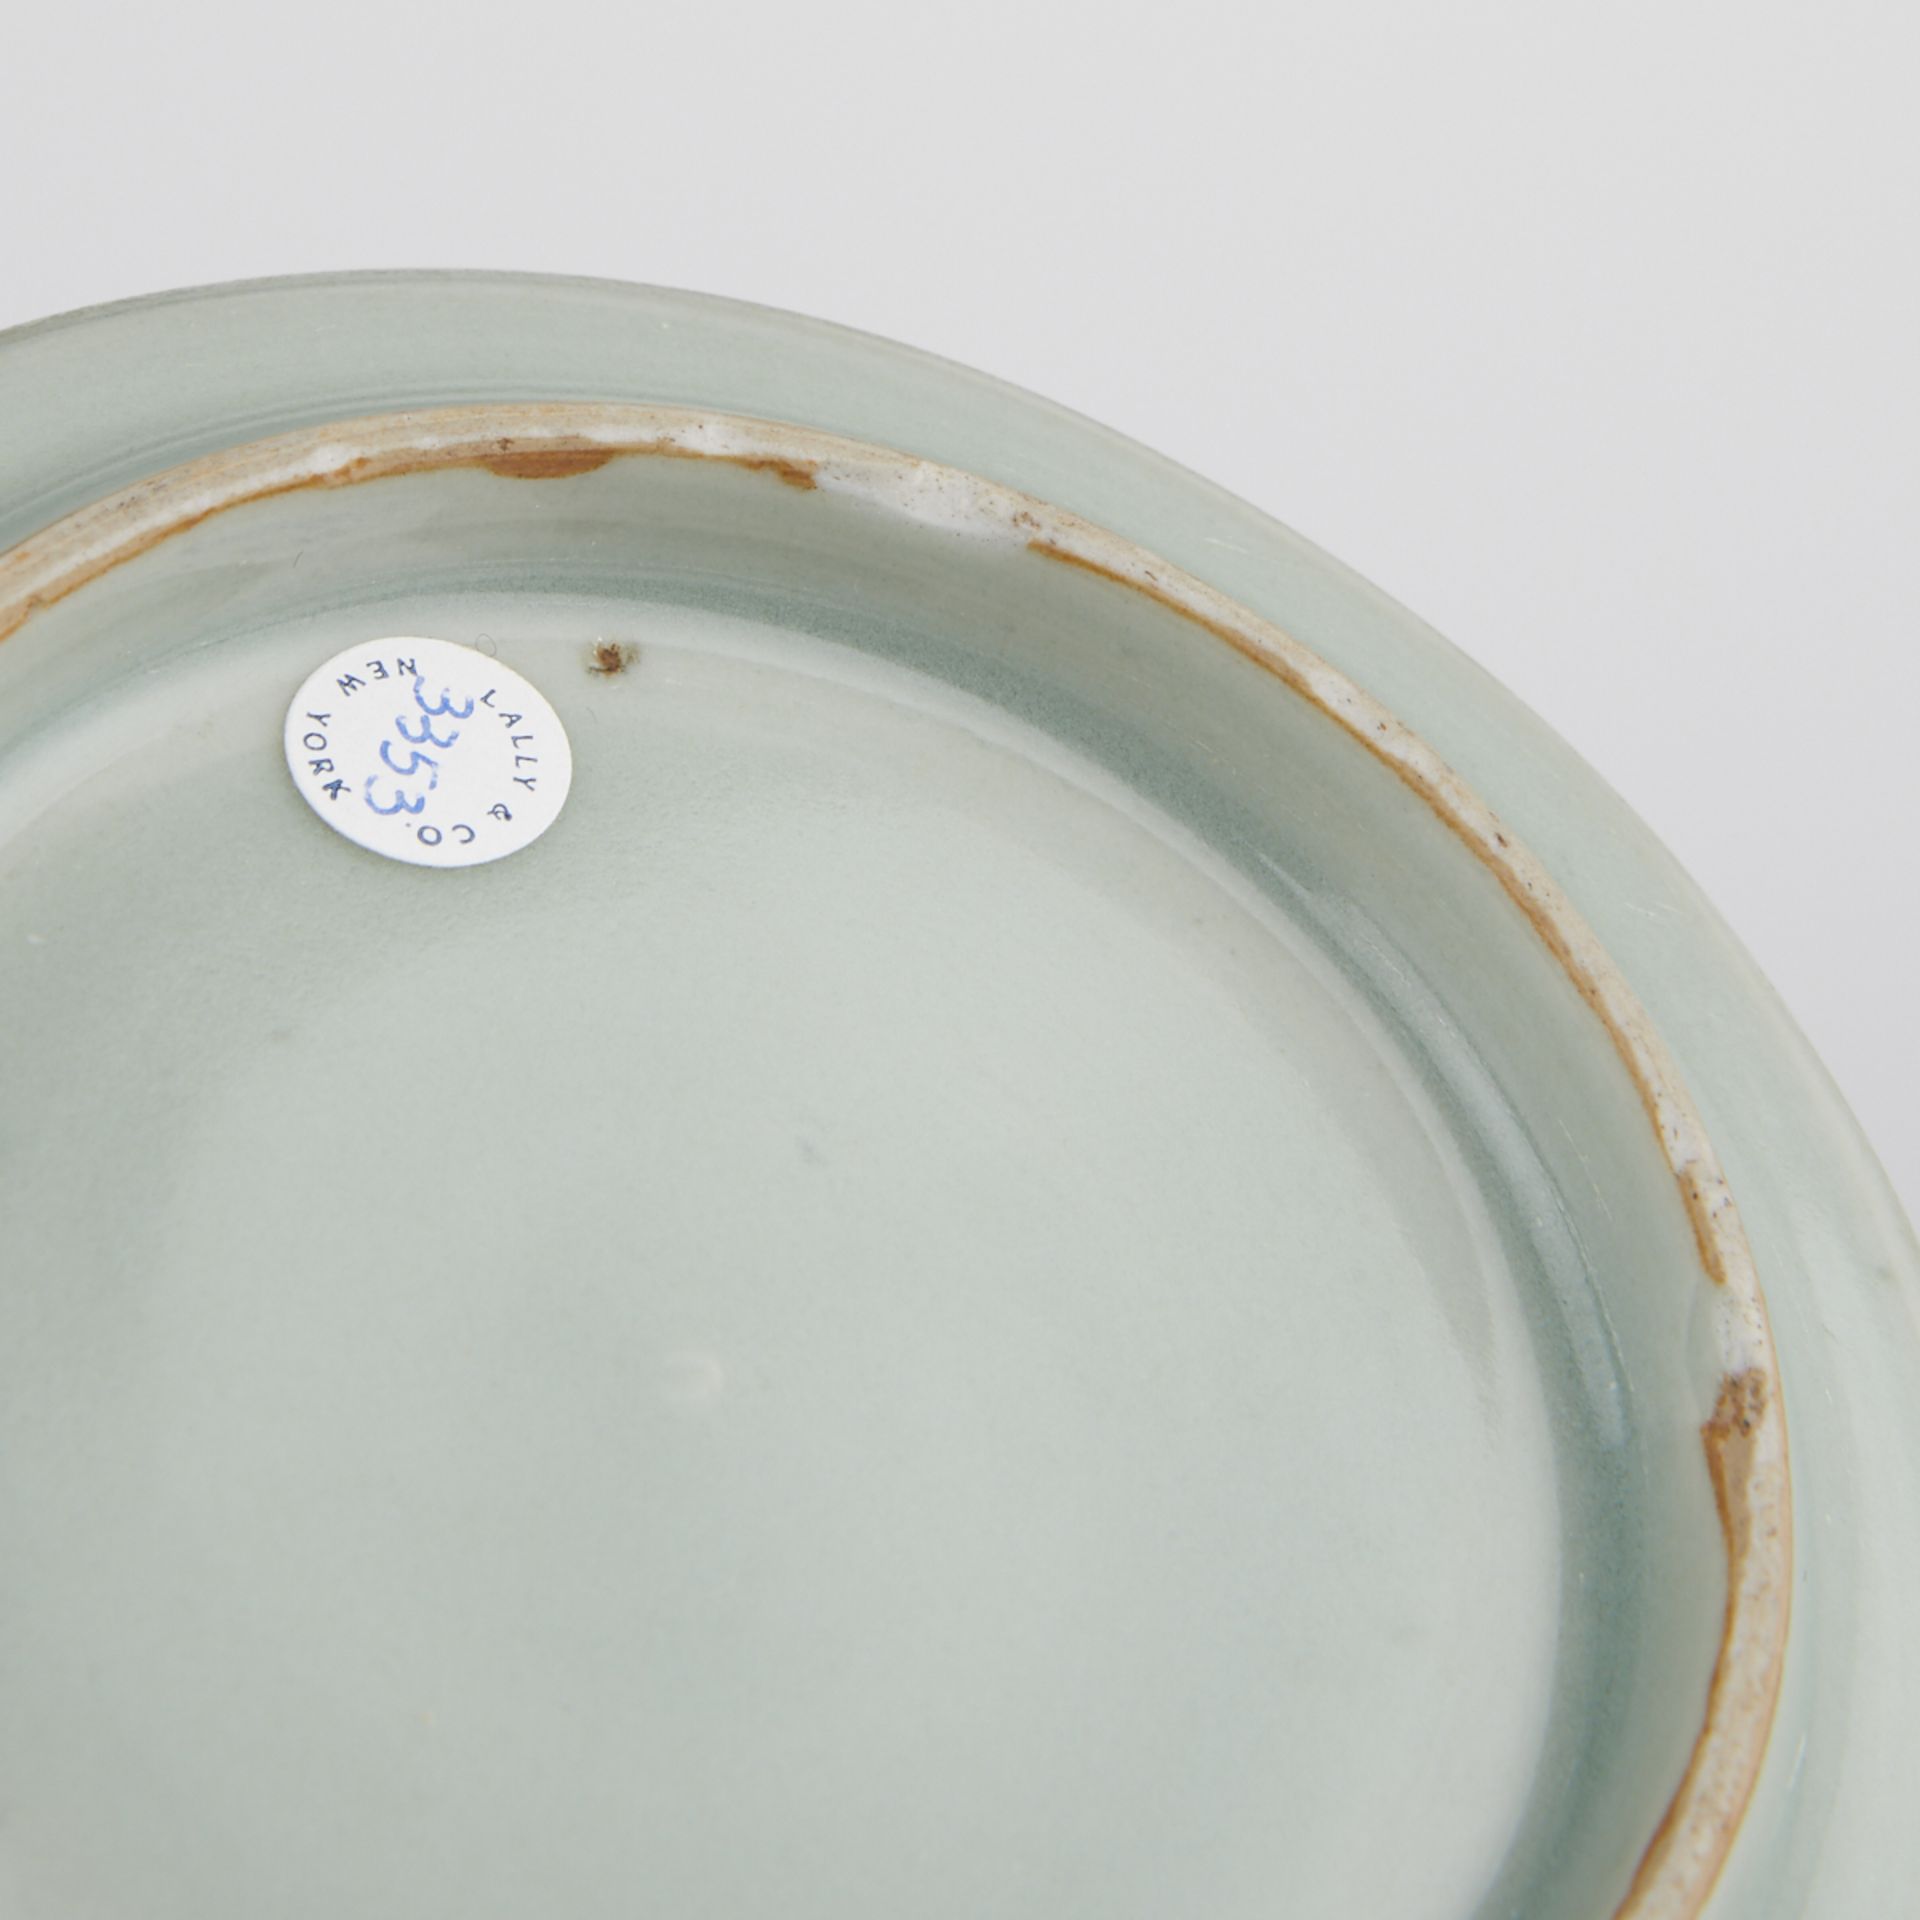 Early Chinese Celadon Porcelain Bowl - Likely Yuan - Image 5 of 9